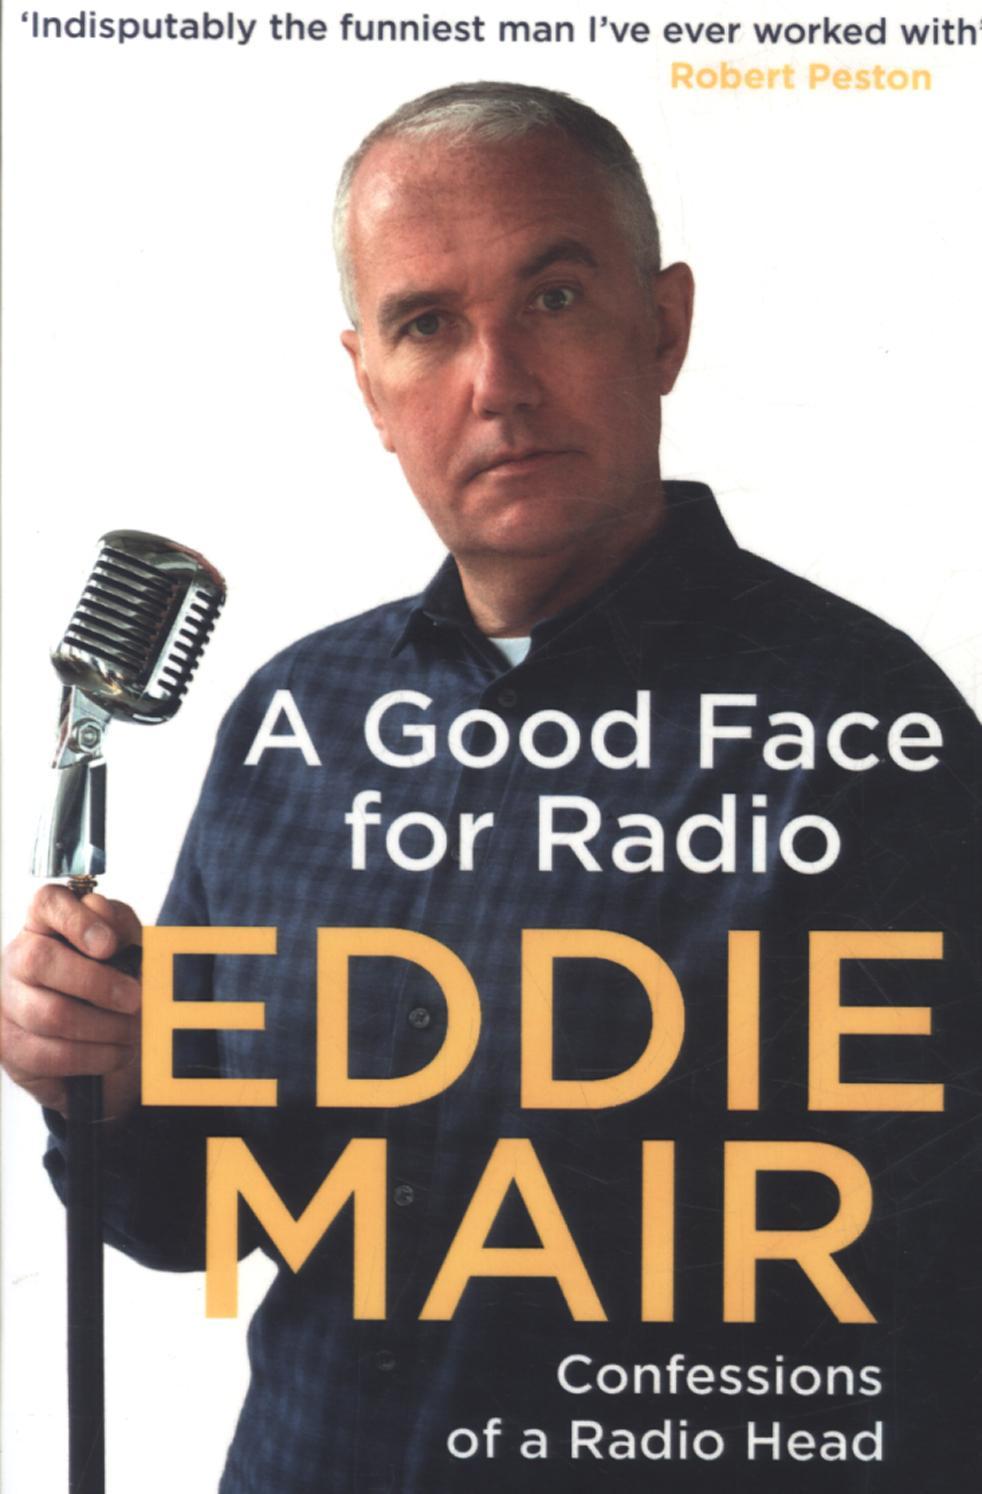 Good Face for Radio